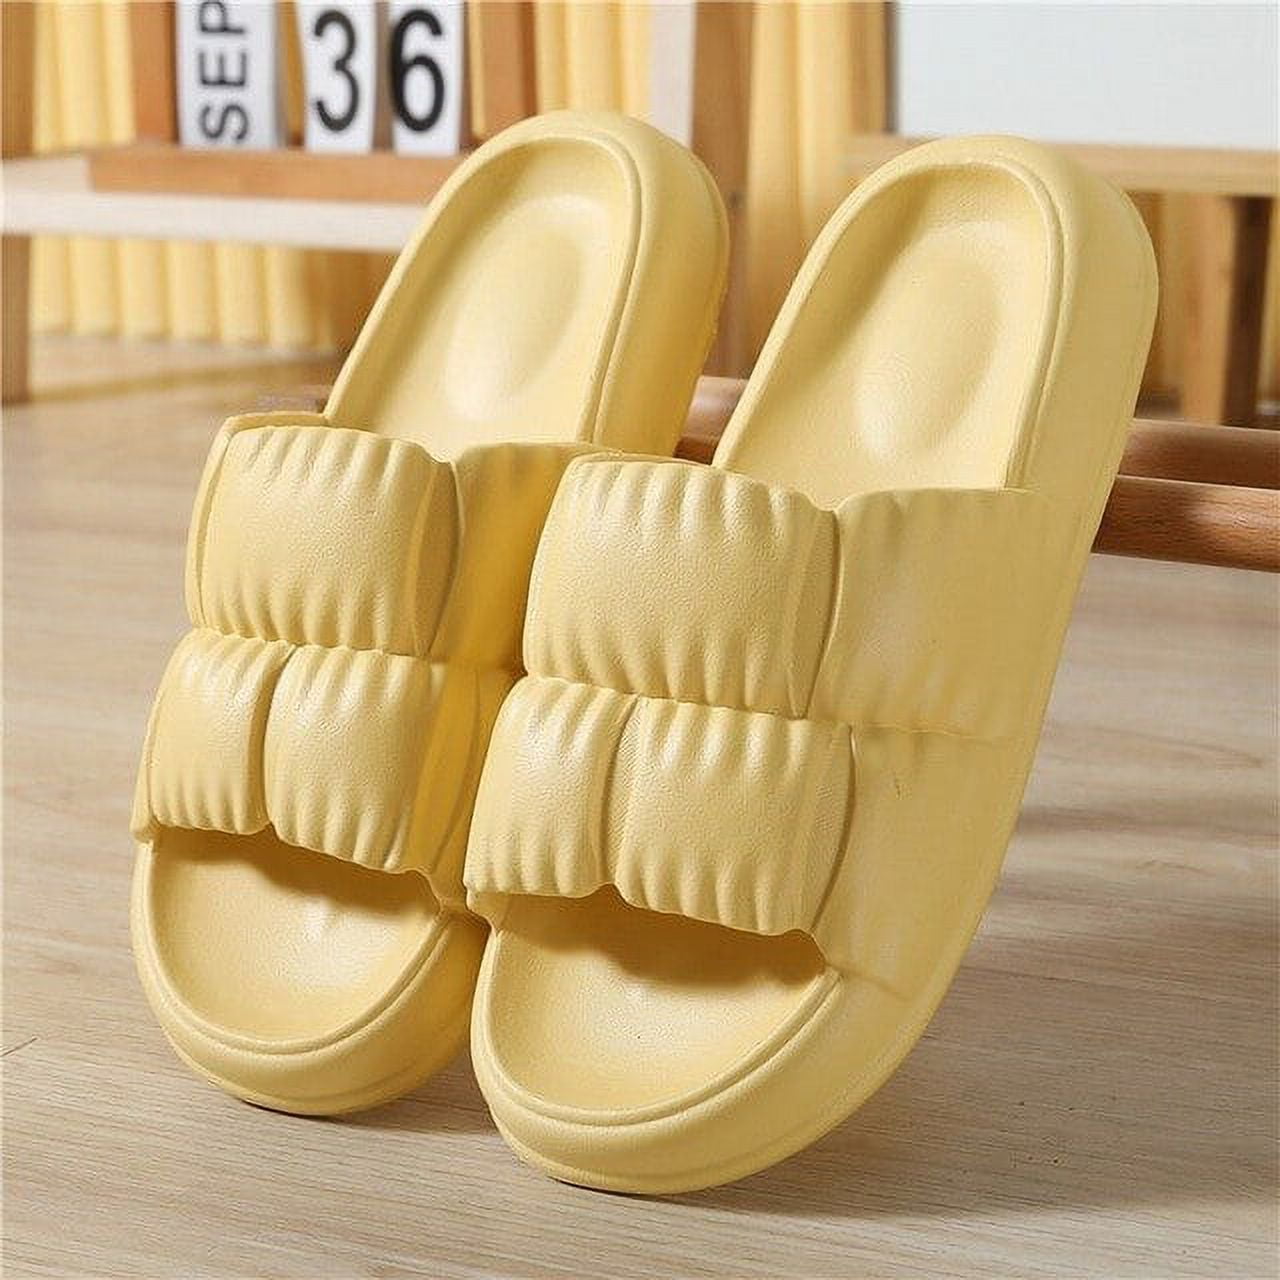 Rubber Gents hard sole slipper, For Daily, Packaging Type: Carton Box